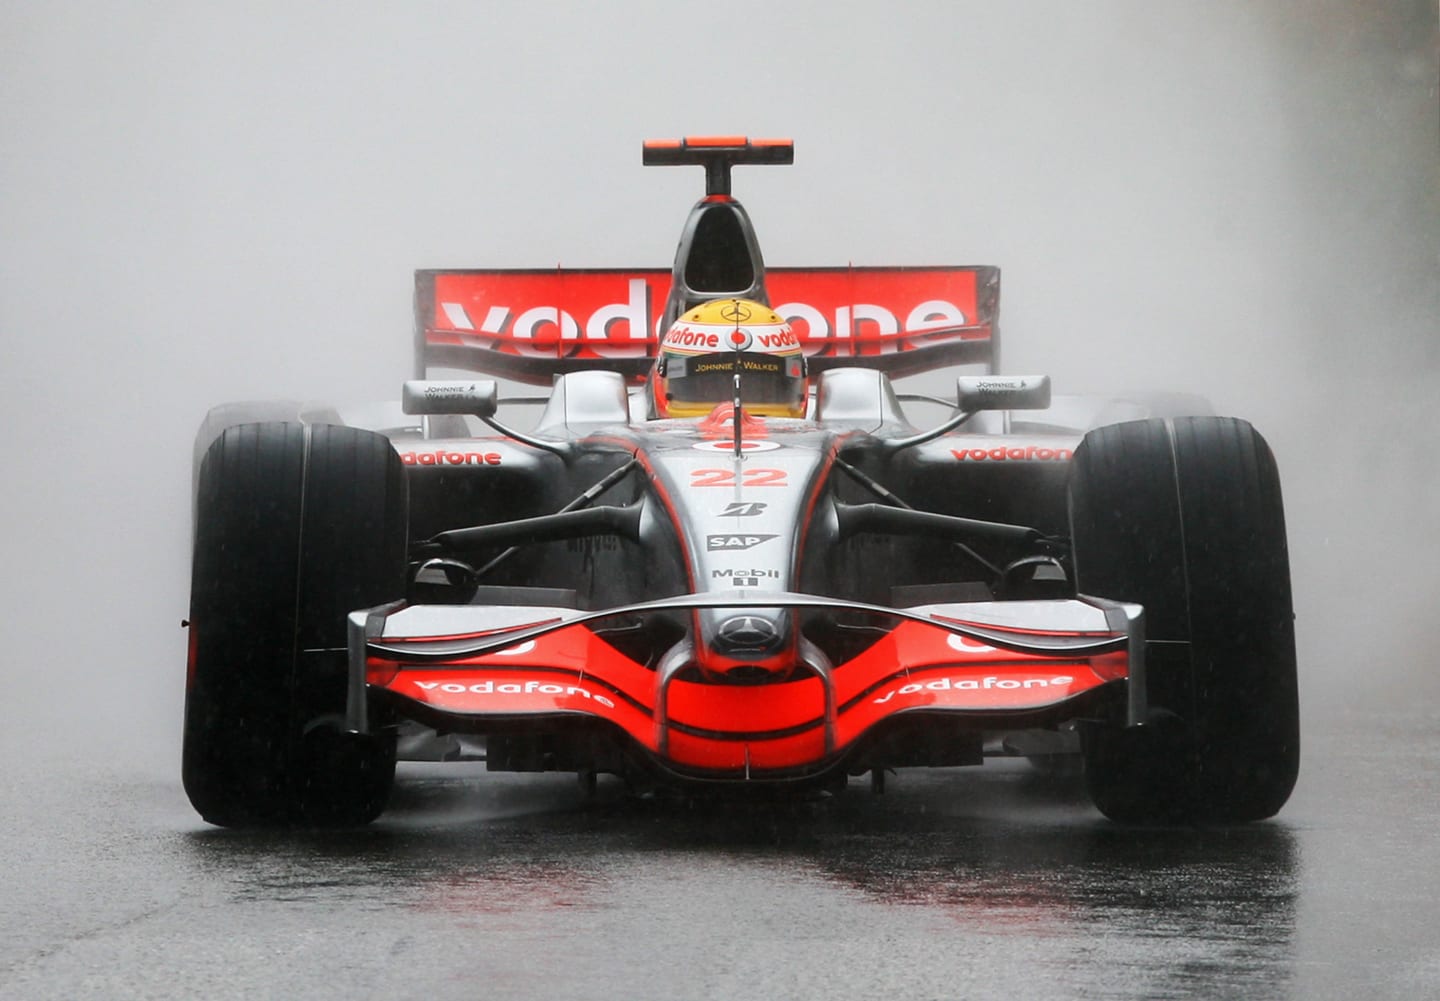 MONTE CARLO, MONACO - MAY 25:  Lewis Hamilton of Great Britain and McLaren Mercedes drives on his